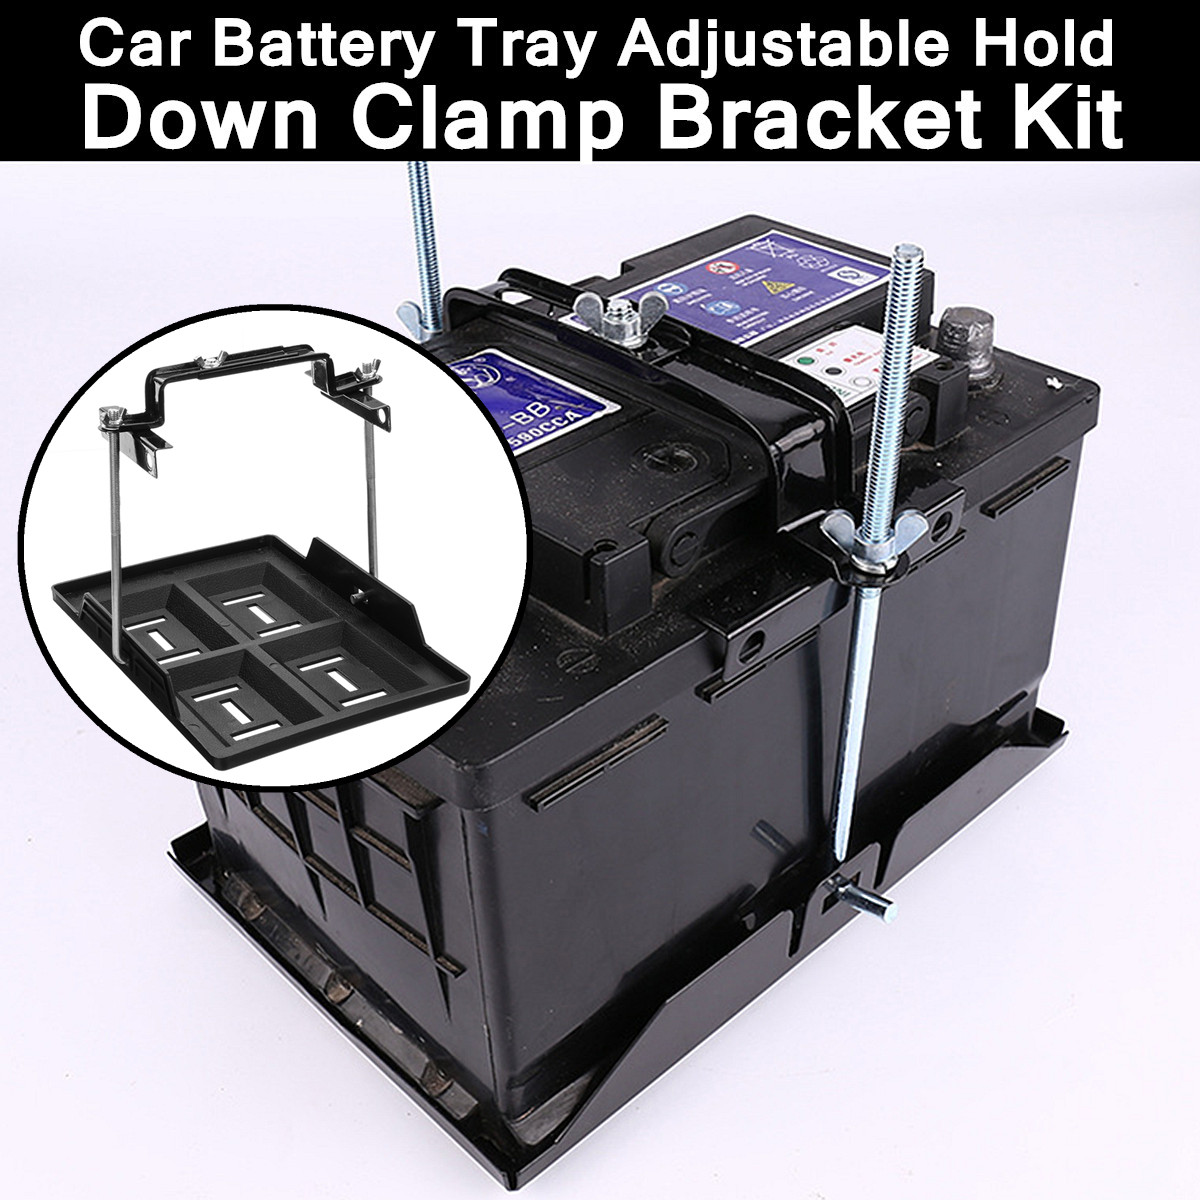 Universal-Battery-Tray-Adjustable-Hold-Down-Battery-Clamp-Bracket-Cycle-19x28cm-1311899-1